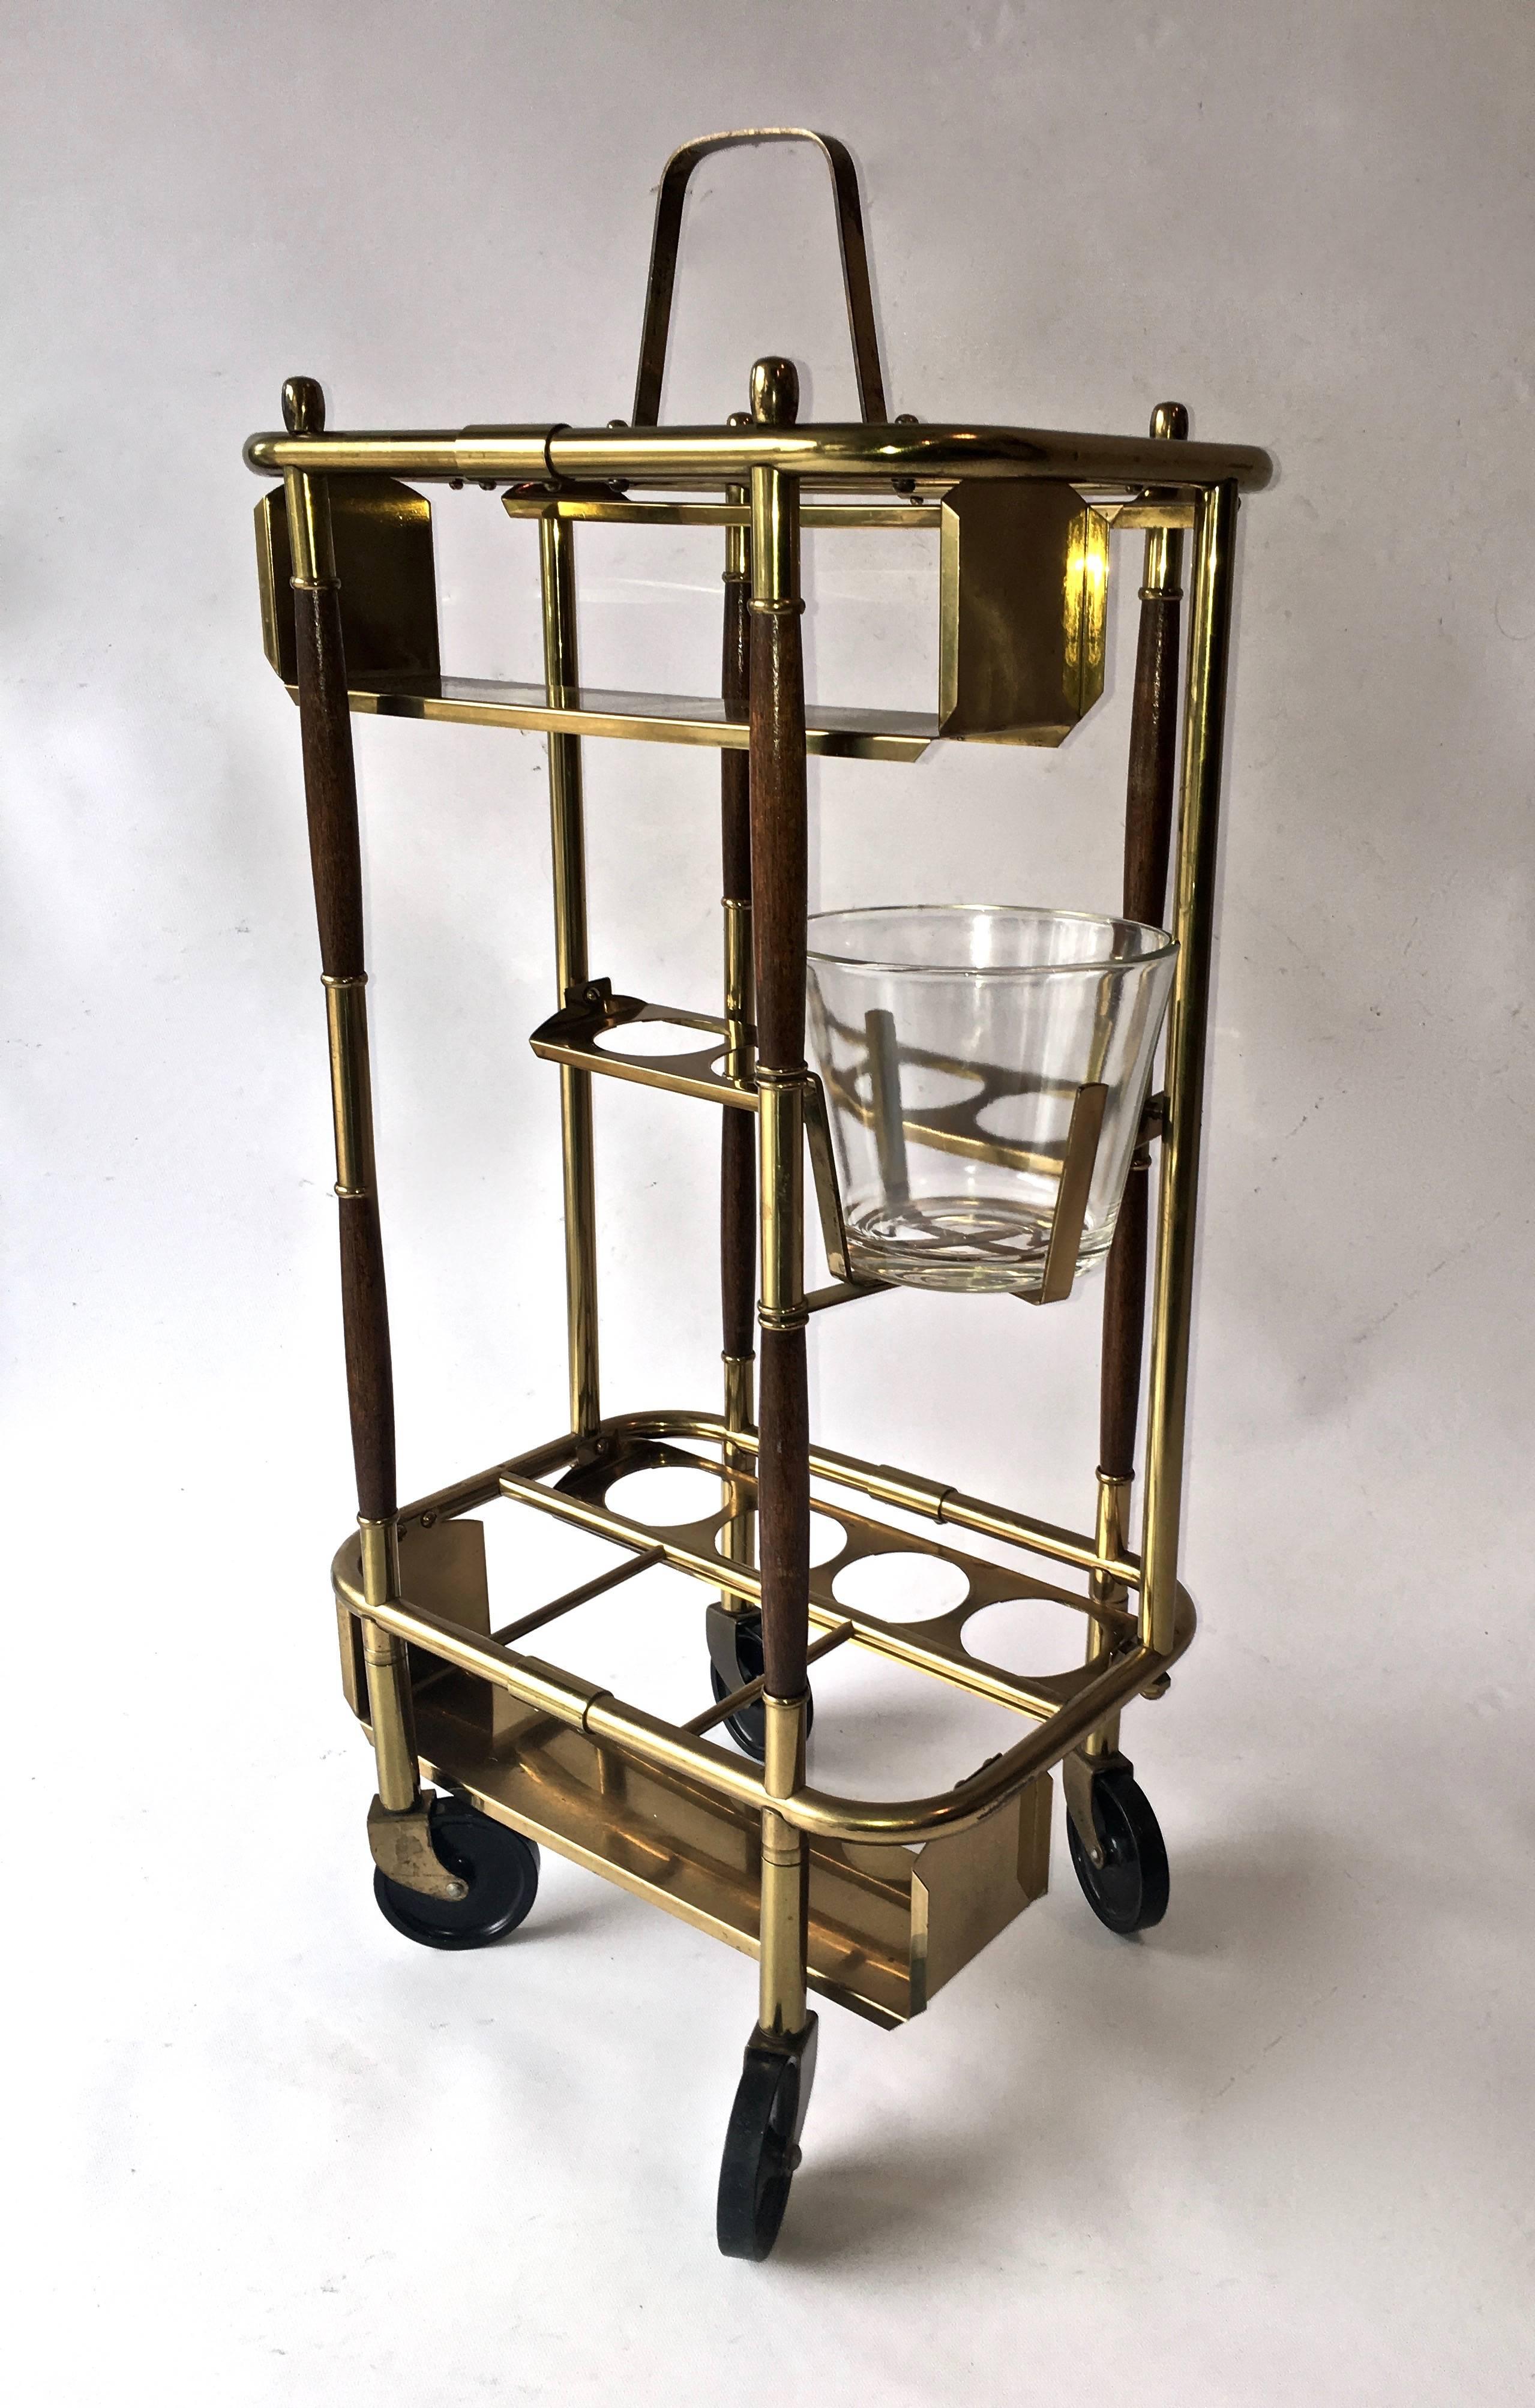 Warm patinated brass and dark wood, with a swivel out ice bucket, complete this gorgeous and functional little bar cart. Handy moveable bar service able to hold glassware, wine/liquor bottles, and ice.